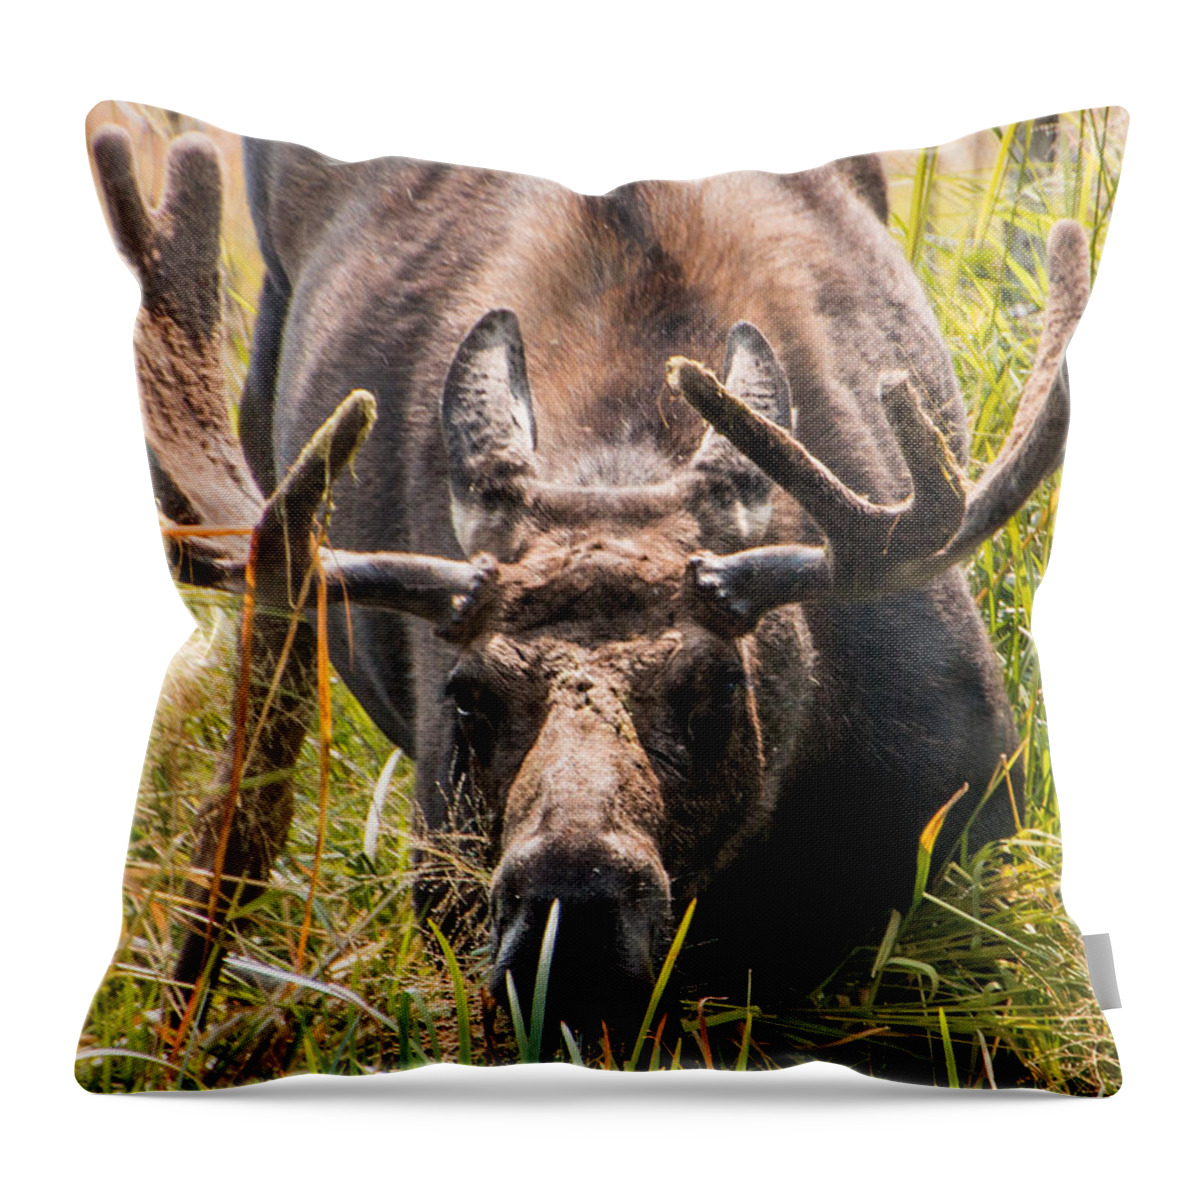 Moose Throw Pillow featuring the photograph Moose by Cathy Donohoue